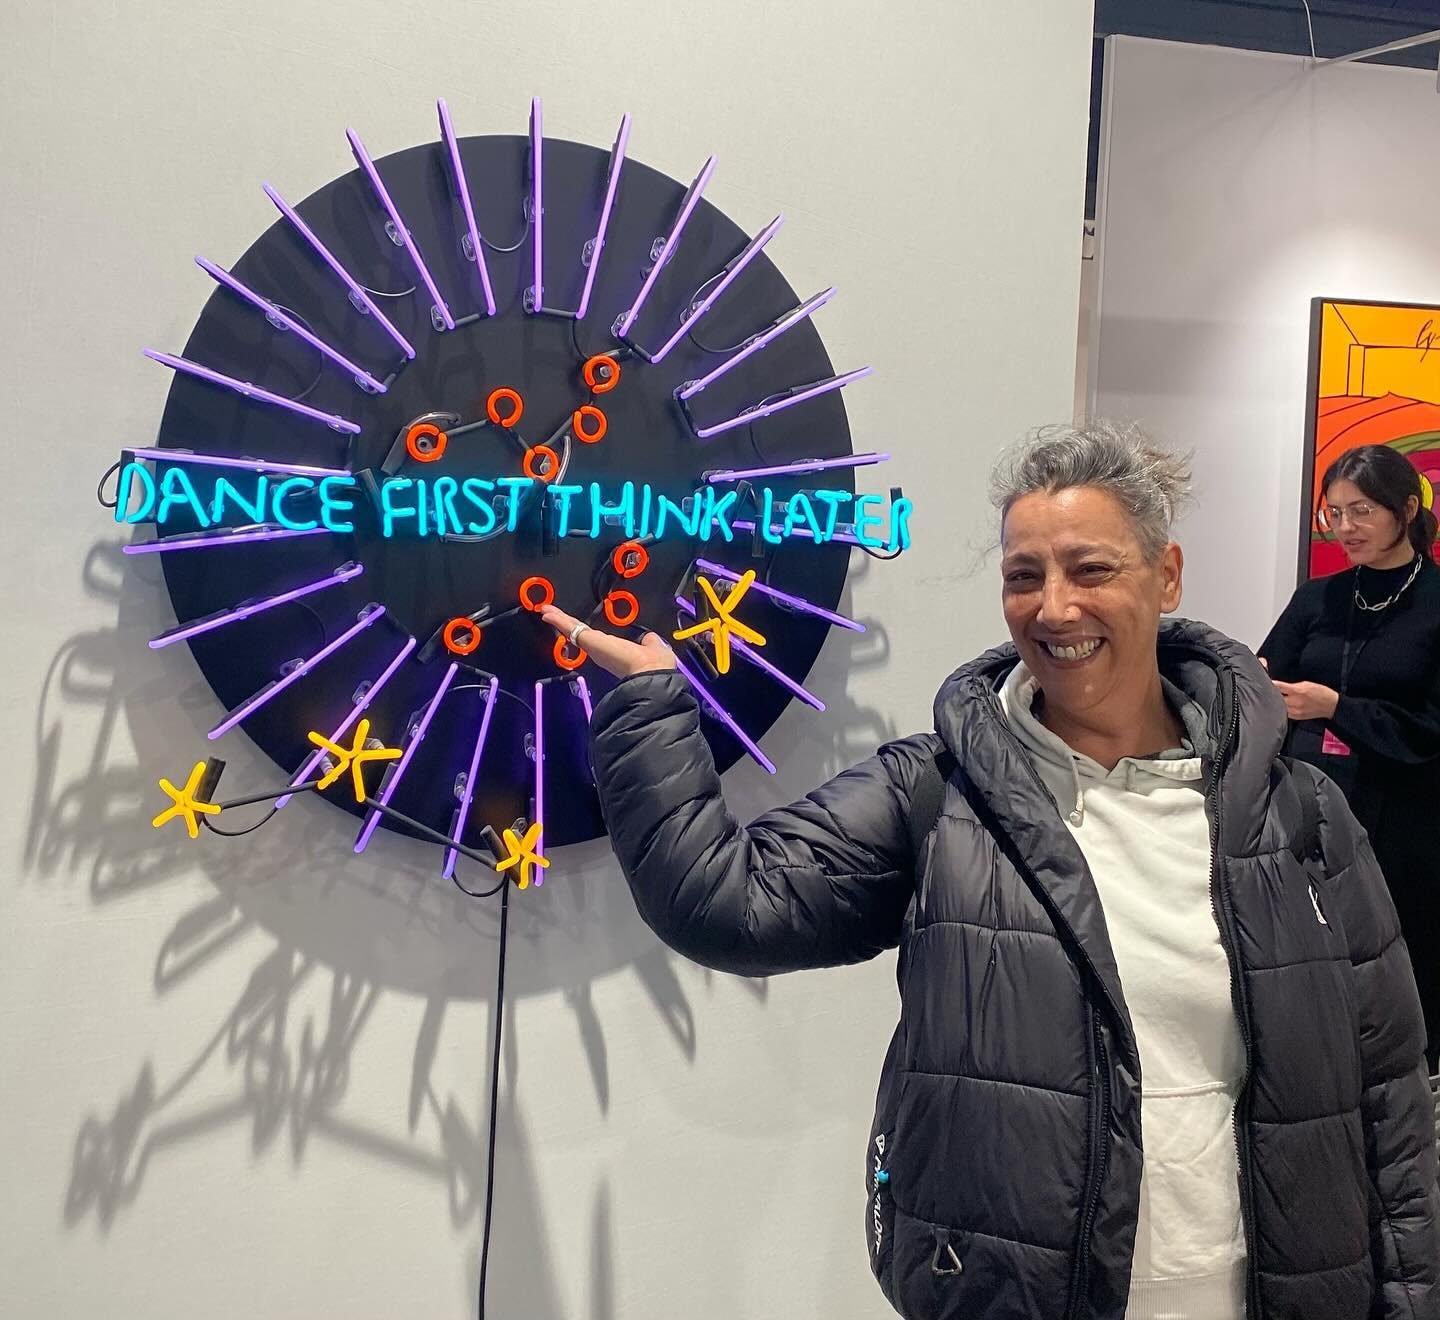 Dance first&hellip;
think later 

Love this artwork I came across at the Art Fair in Paris.

Visit audreyboss.com to find out how to dance with me 👯&zwj;♂️ Don&rsquo;t think, just do it 🤩

#openfloormovementpractice 
#dancelondon